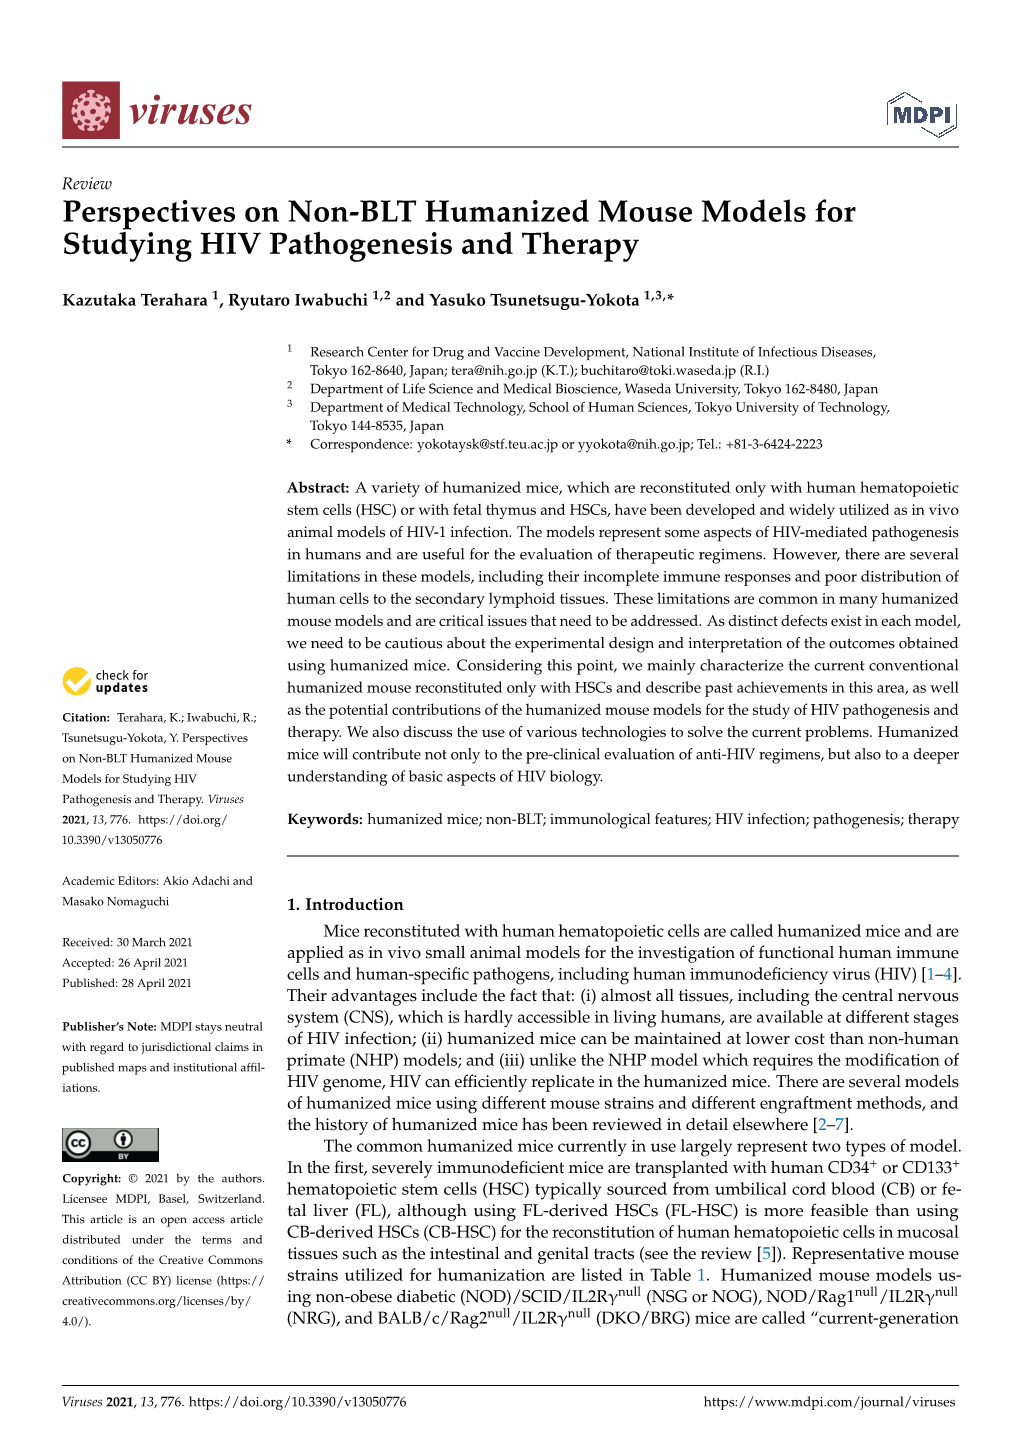 Perspectives on Non-BLT Humanized Mouse Models for Studying HIV Pathogenesis and Therapy